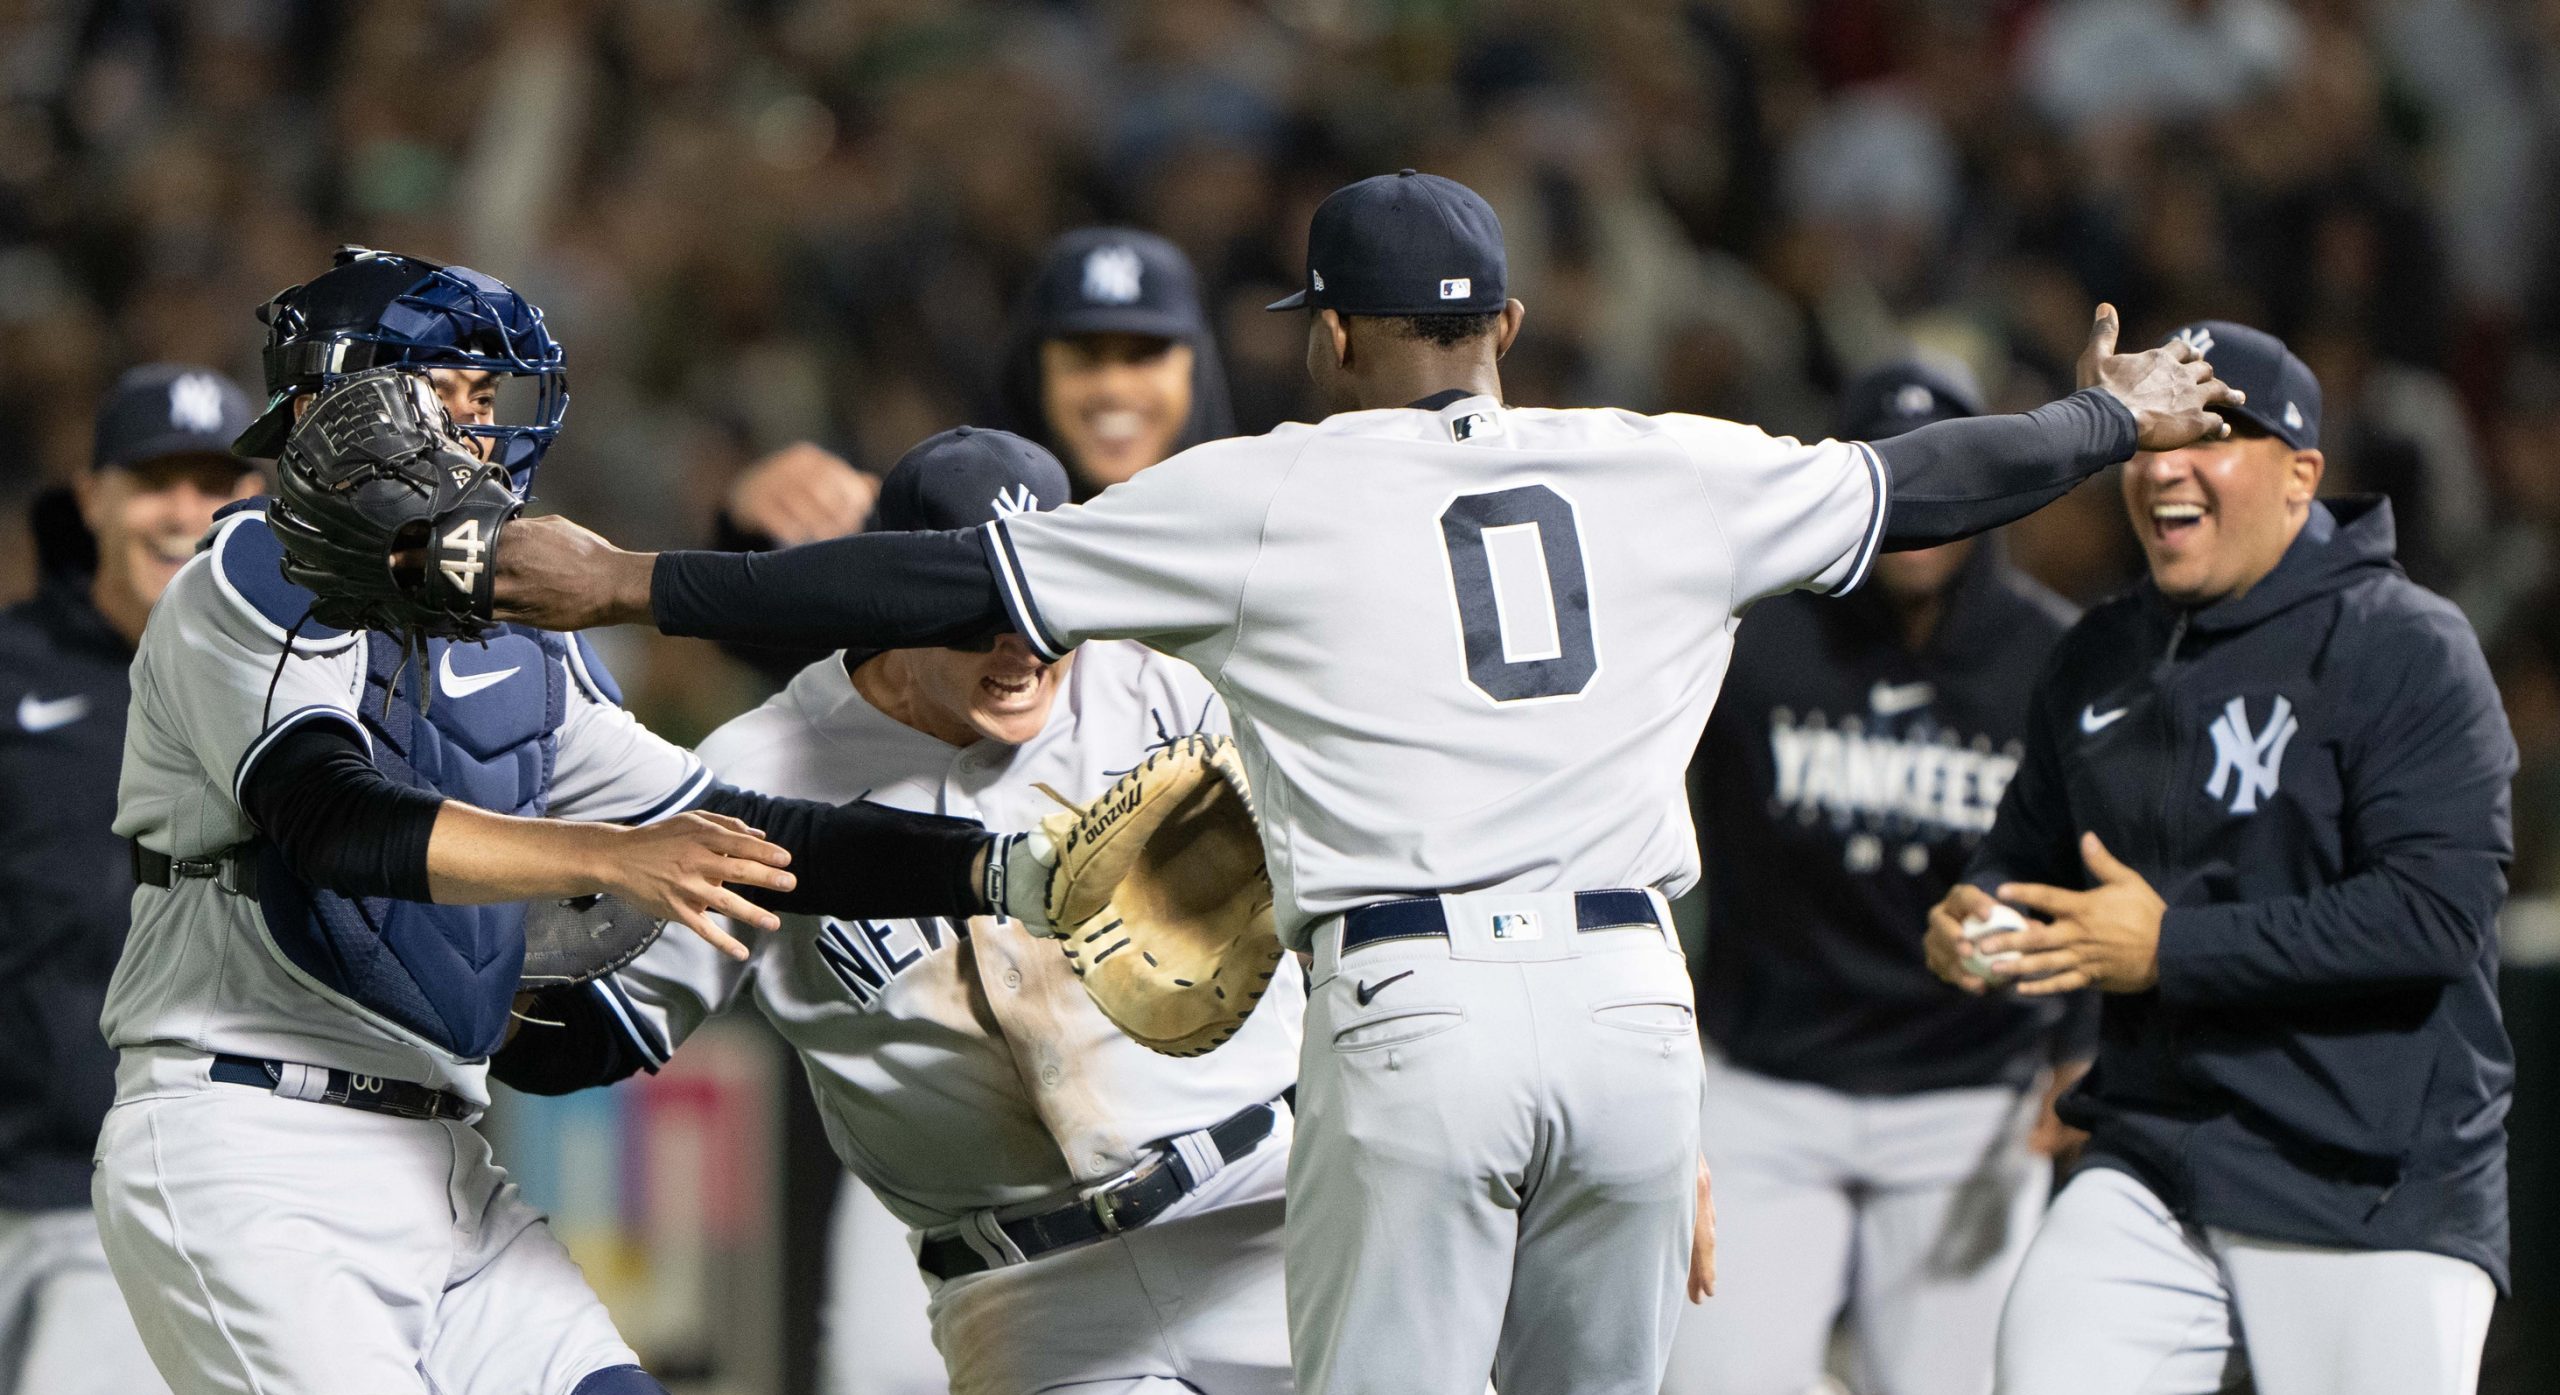 Domingo German's teammates rush him after throwing a perfect game against the Athletics.